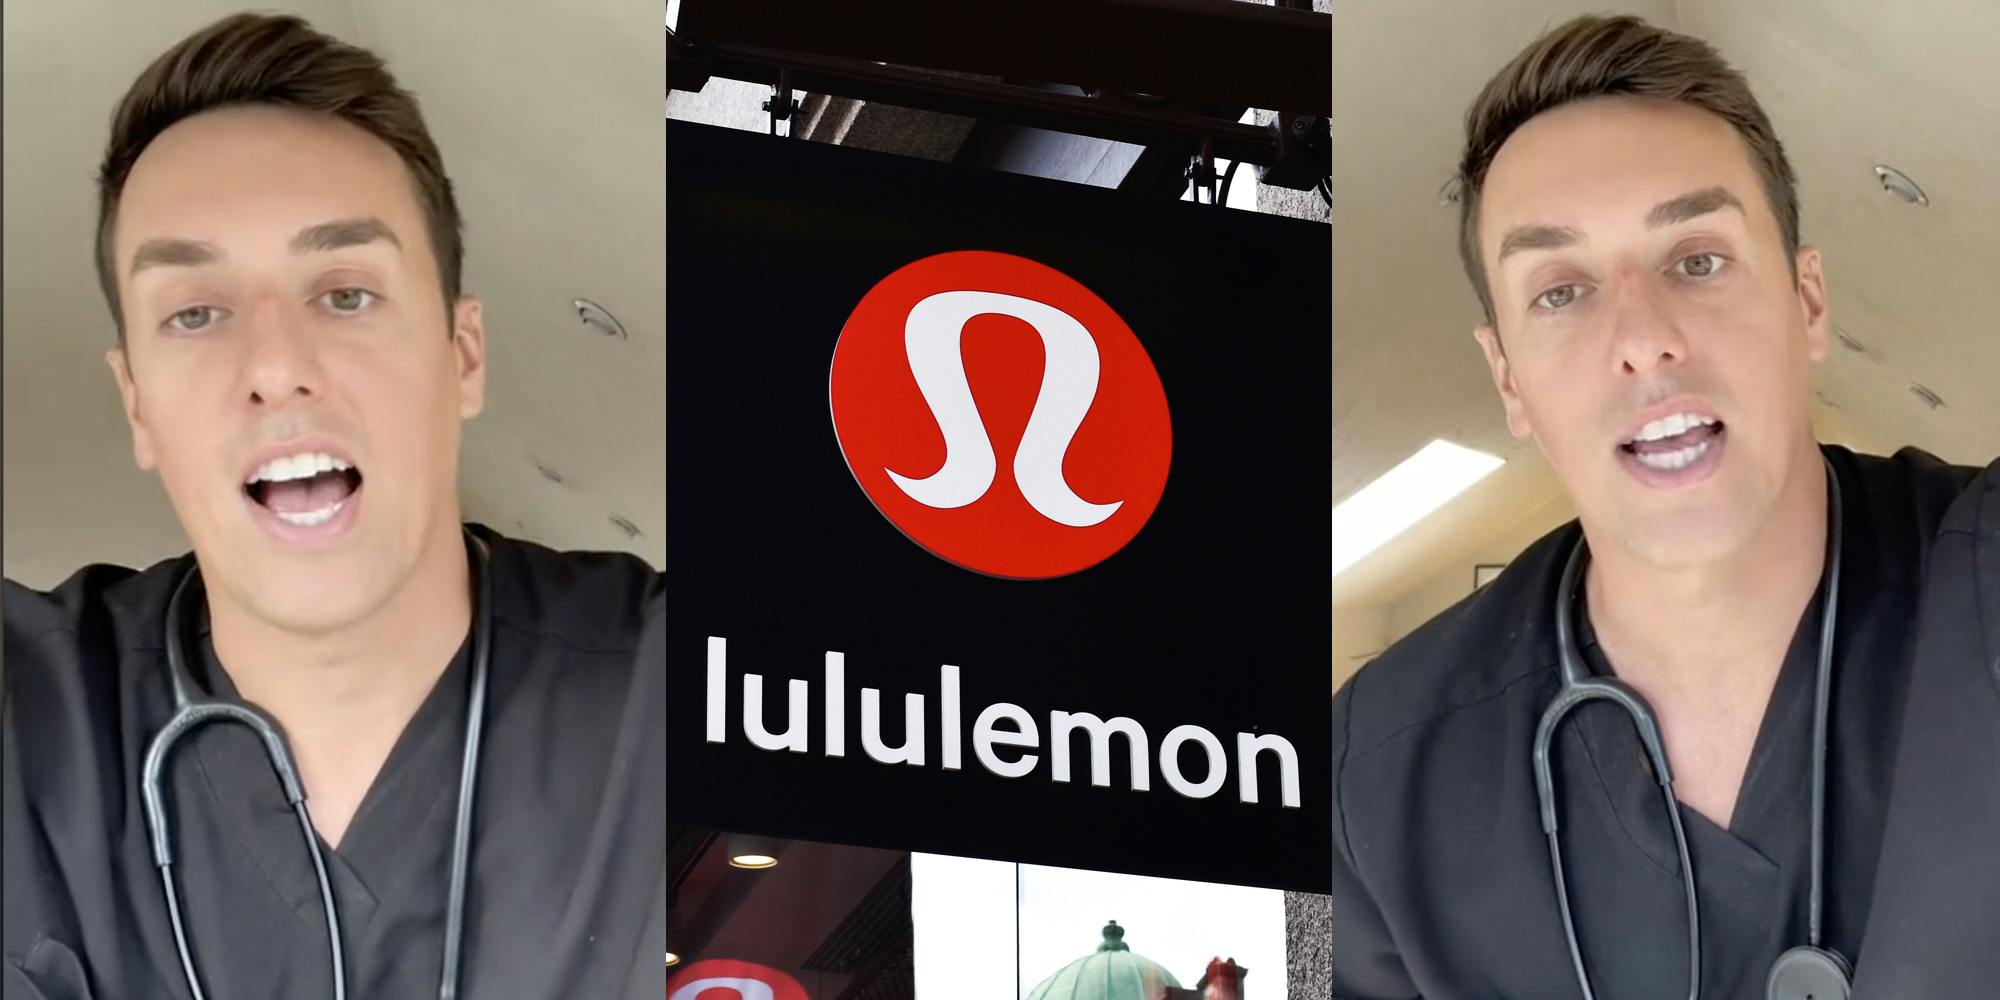 PA Slams Lululemon After He's Not Elligible for First Responders